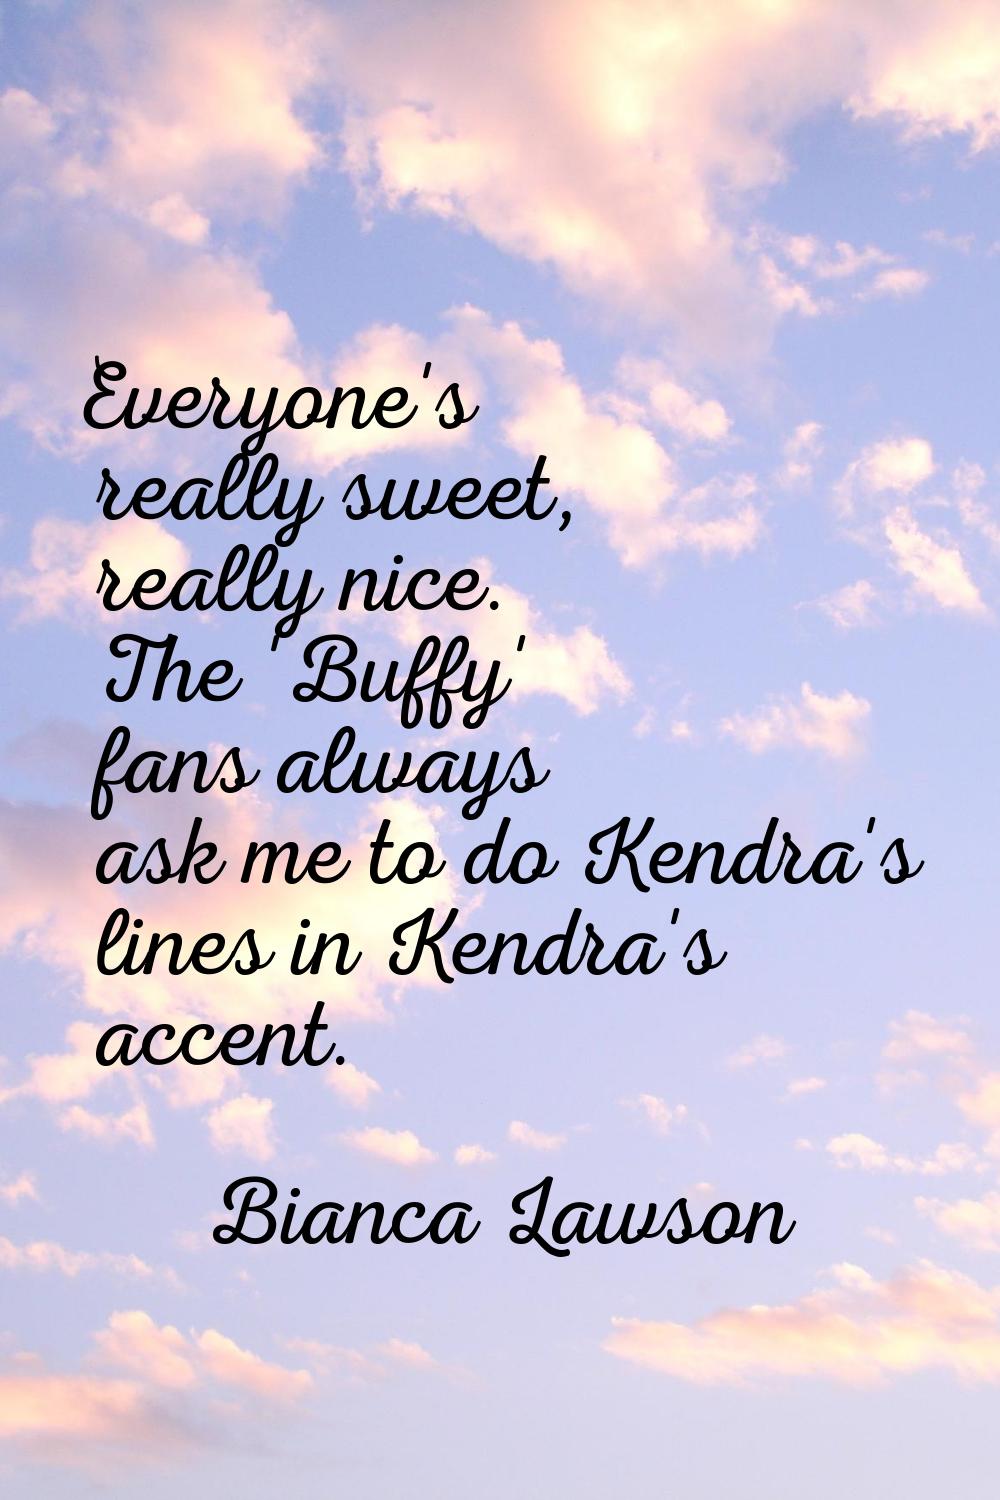 Everyone's really sweet, really nice. The 'Buffy' fans always ask me to do Kendra's lines in Kendra